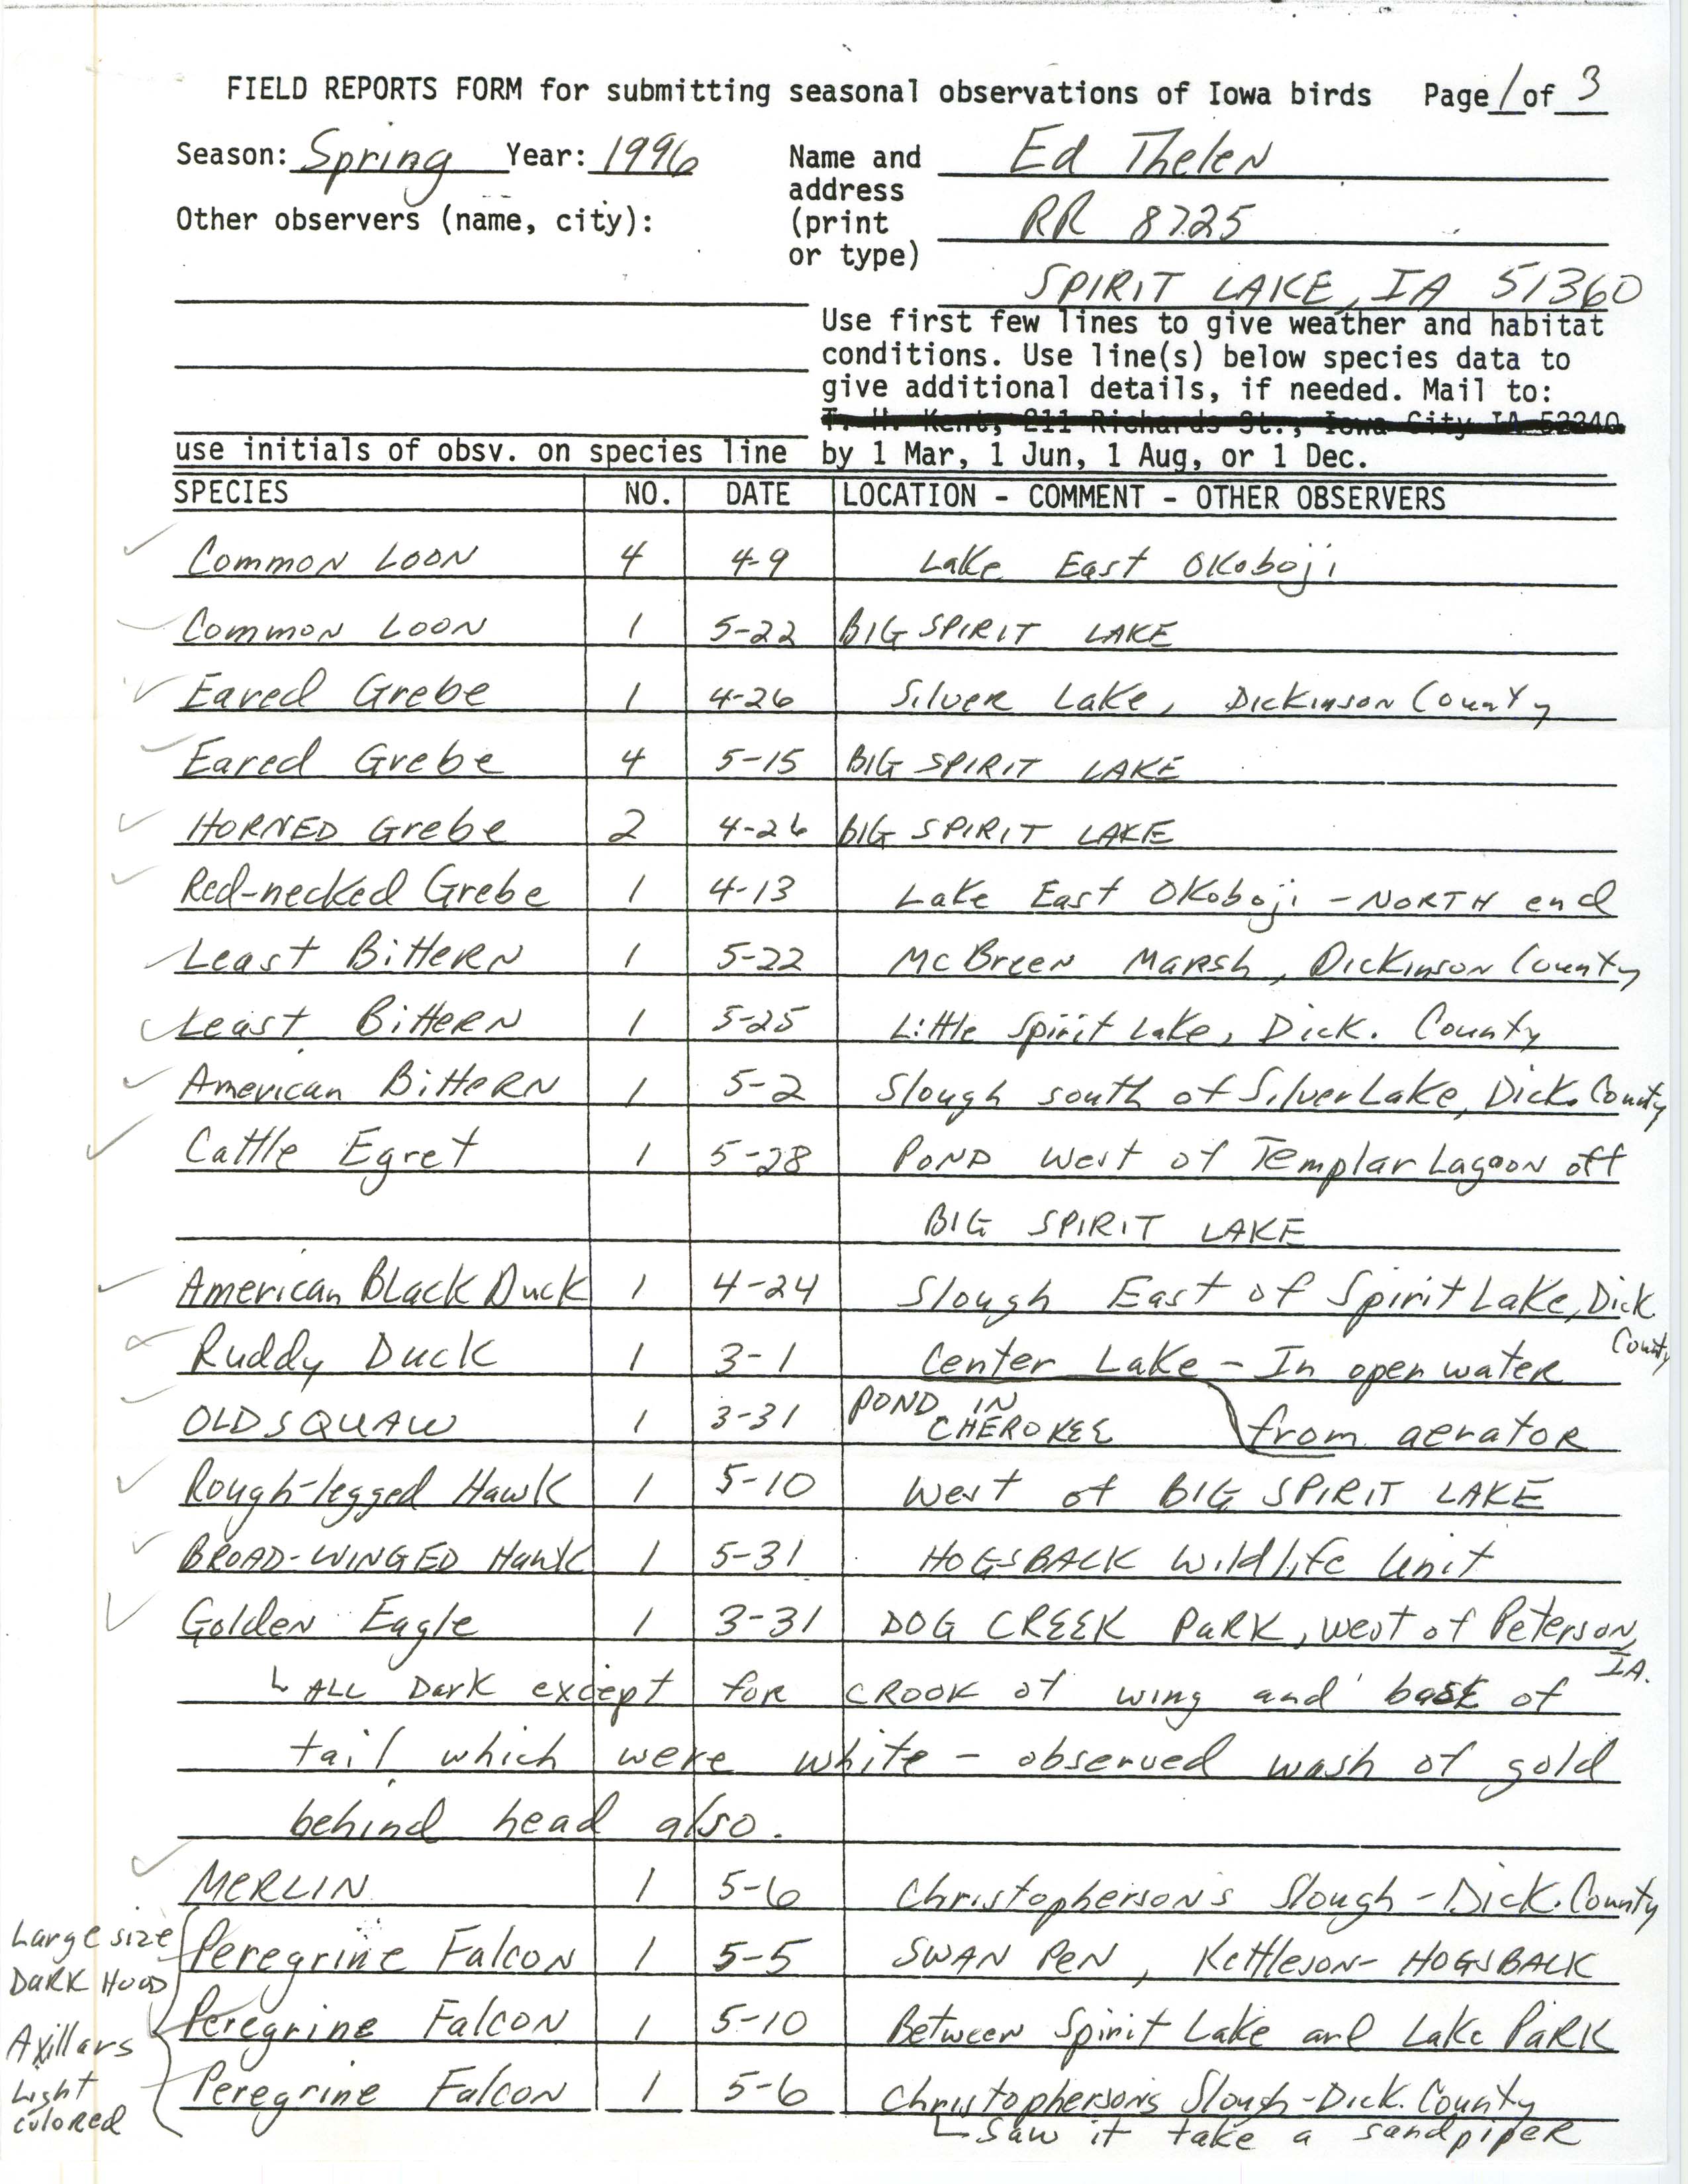 Field reports form for submitting seasonal observations of Iowa birds, Ed Thelen, spring 1996